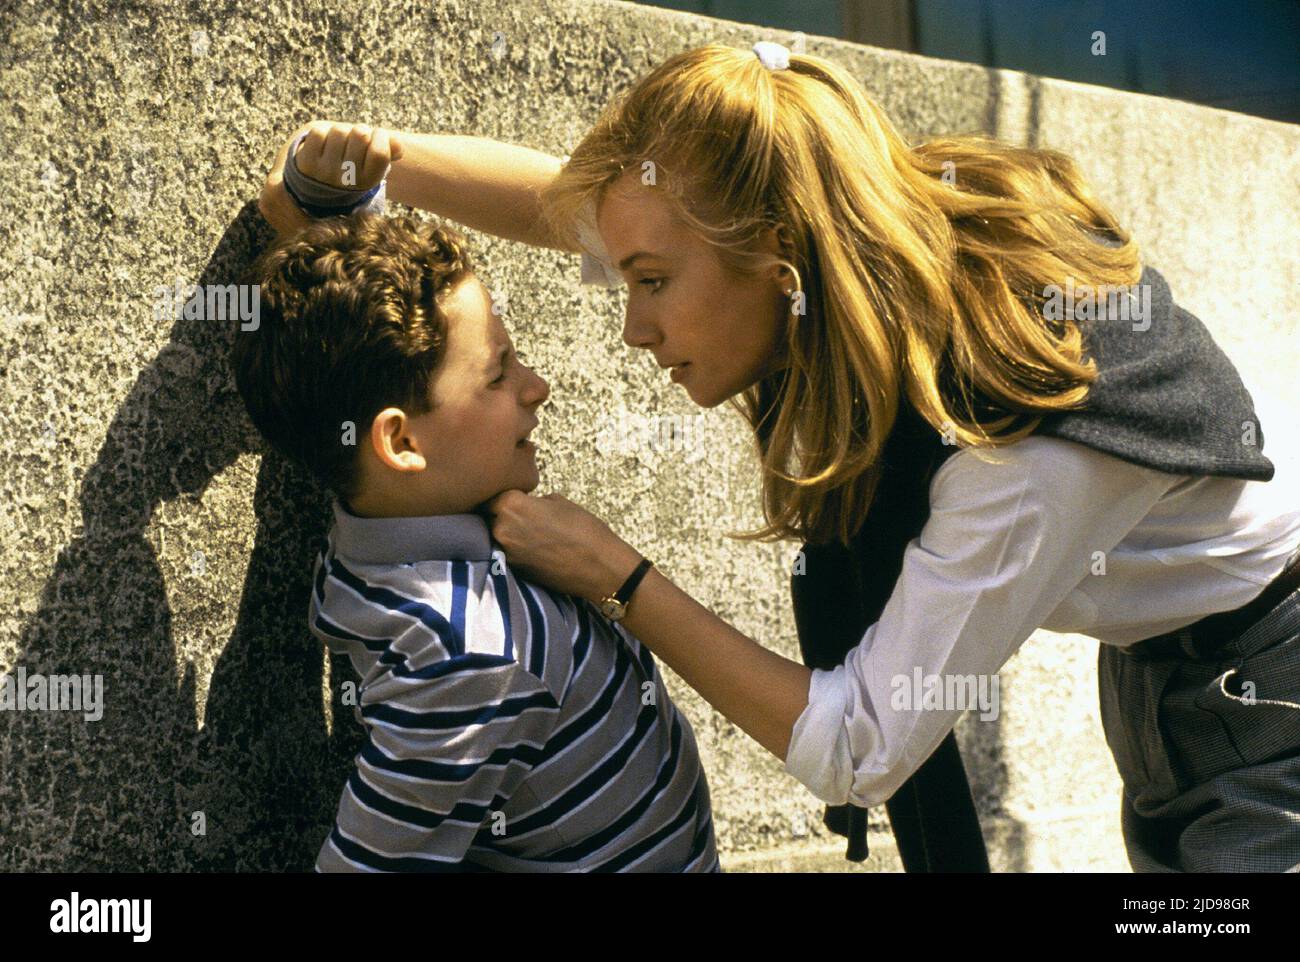 REBECCA DE MORNAY, THE HAND THAT ROCKS THE CRADLE, 1992, Stock Photo